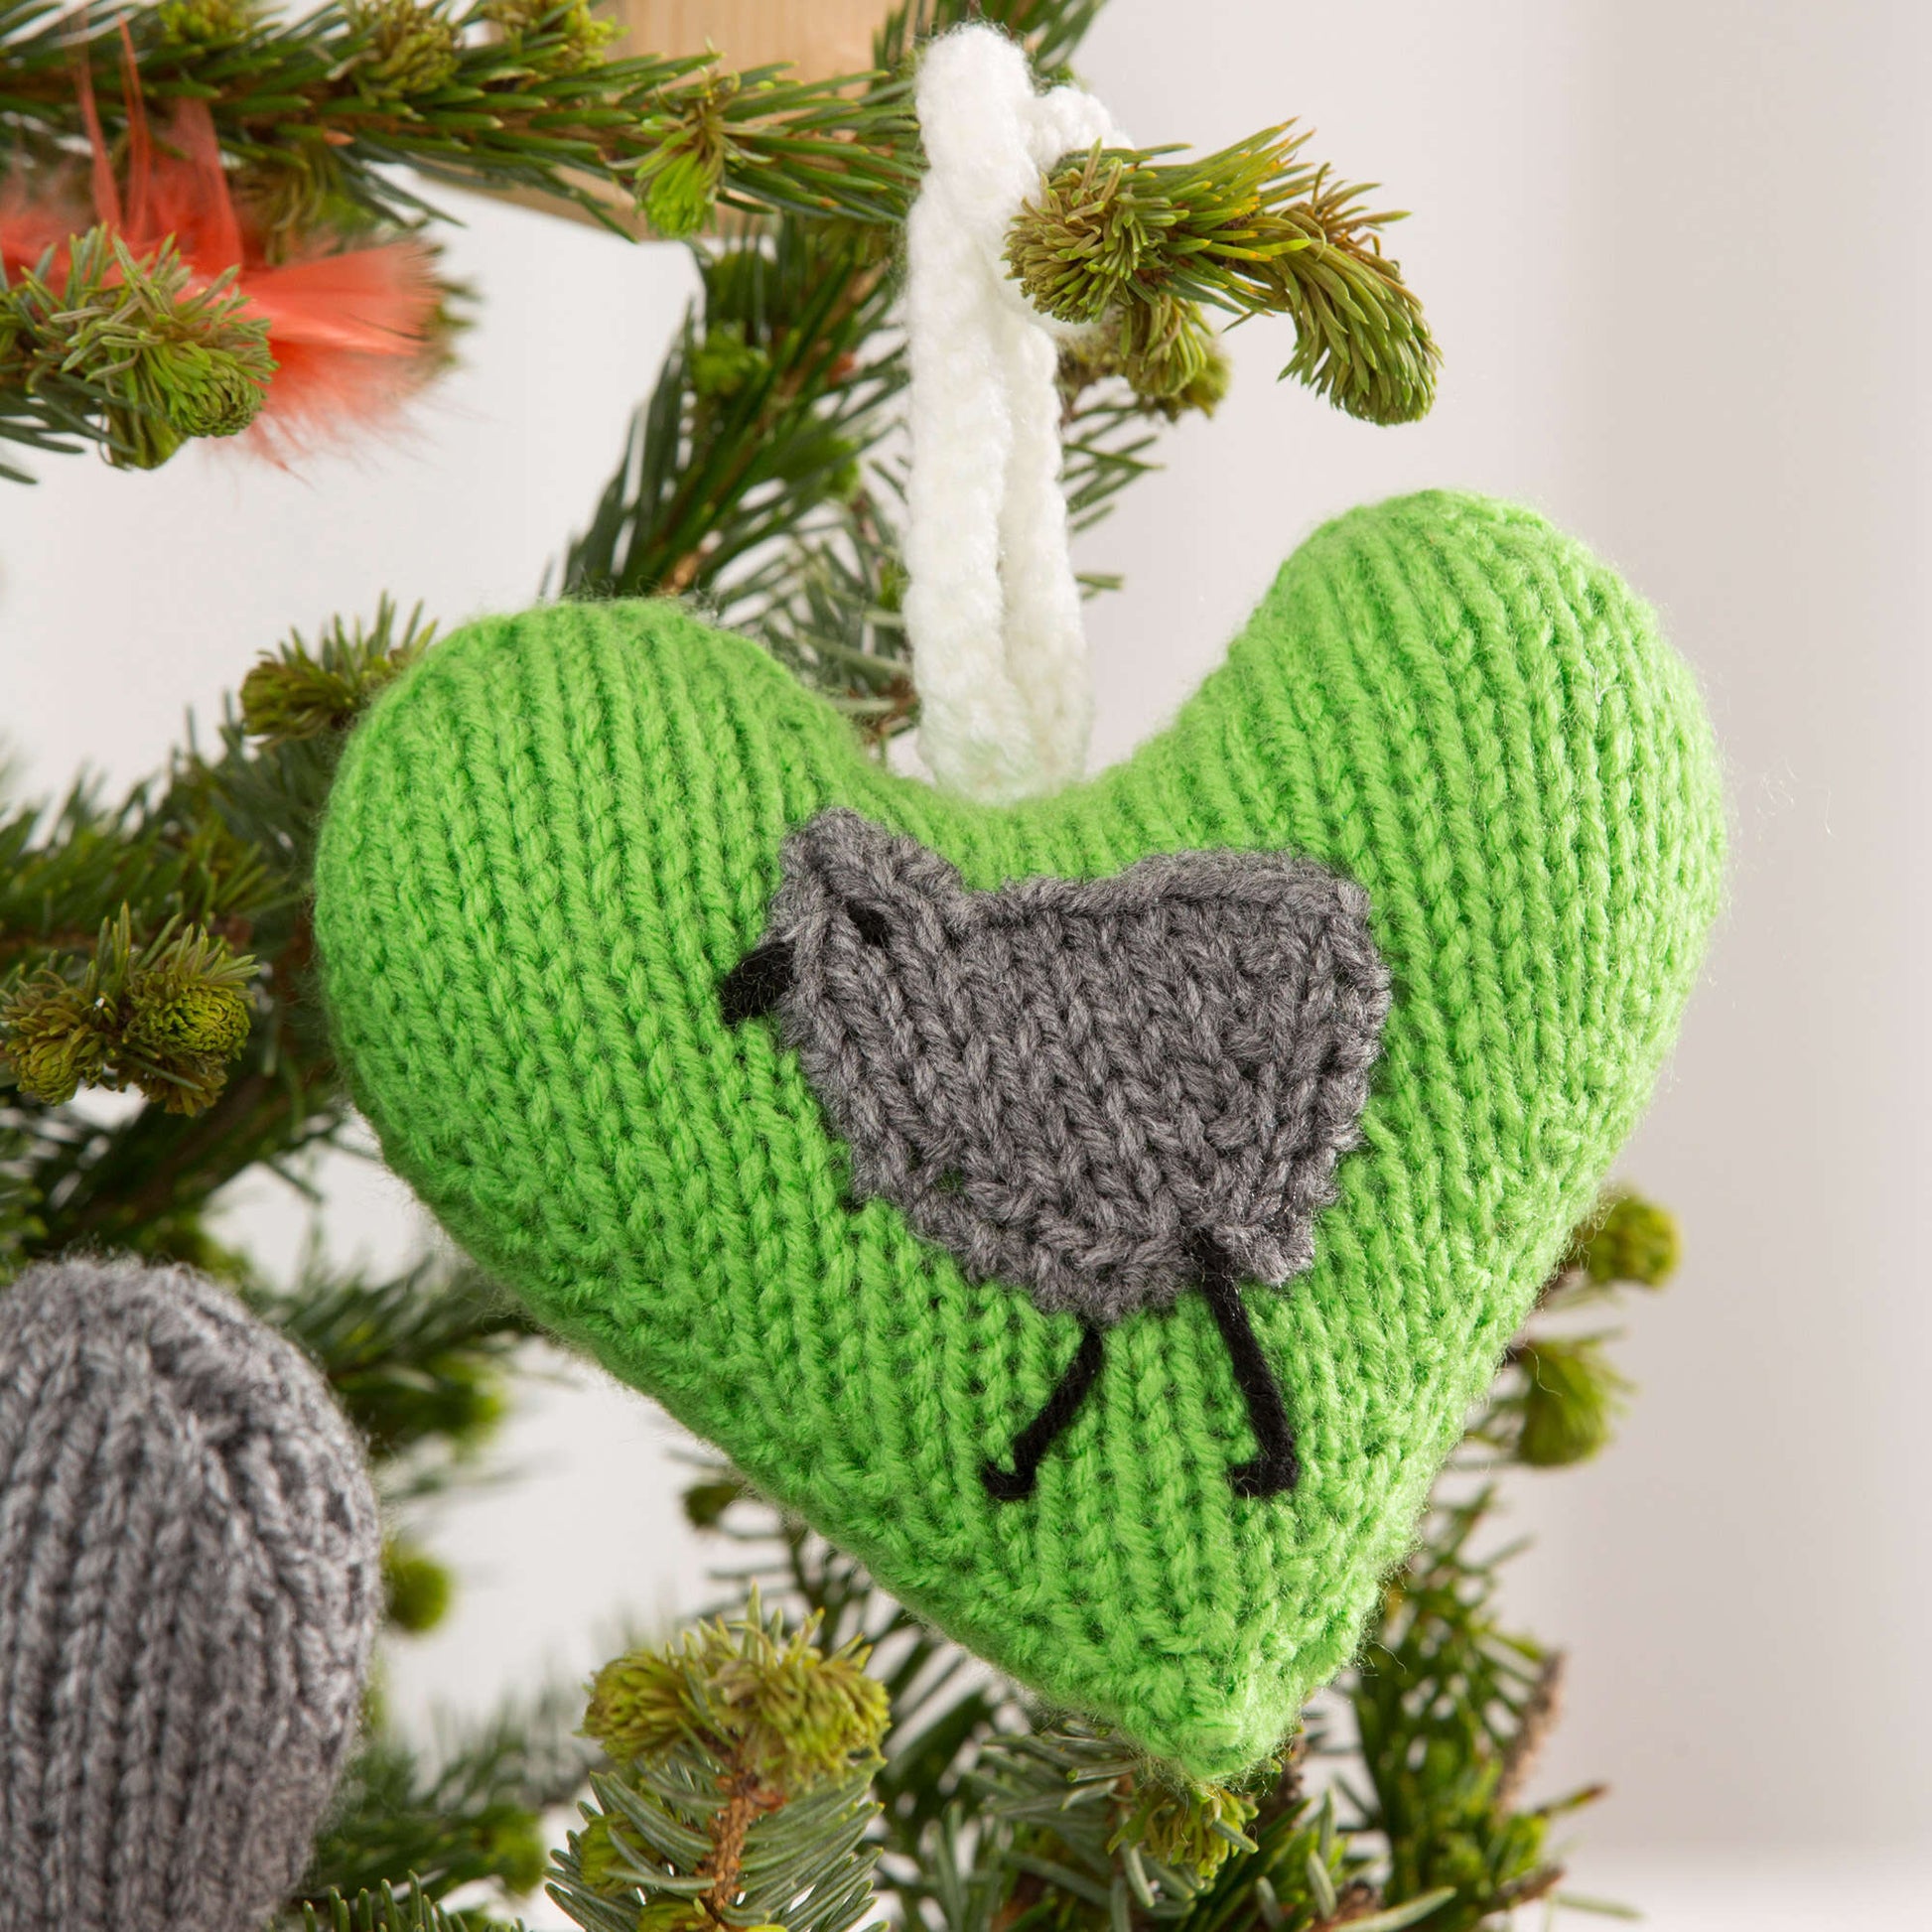 Free Red Heart Holiday Heart Ornaments Pattern